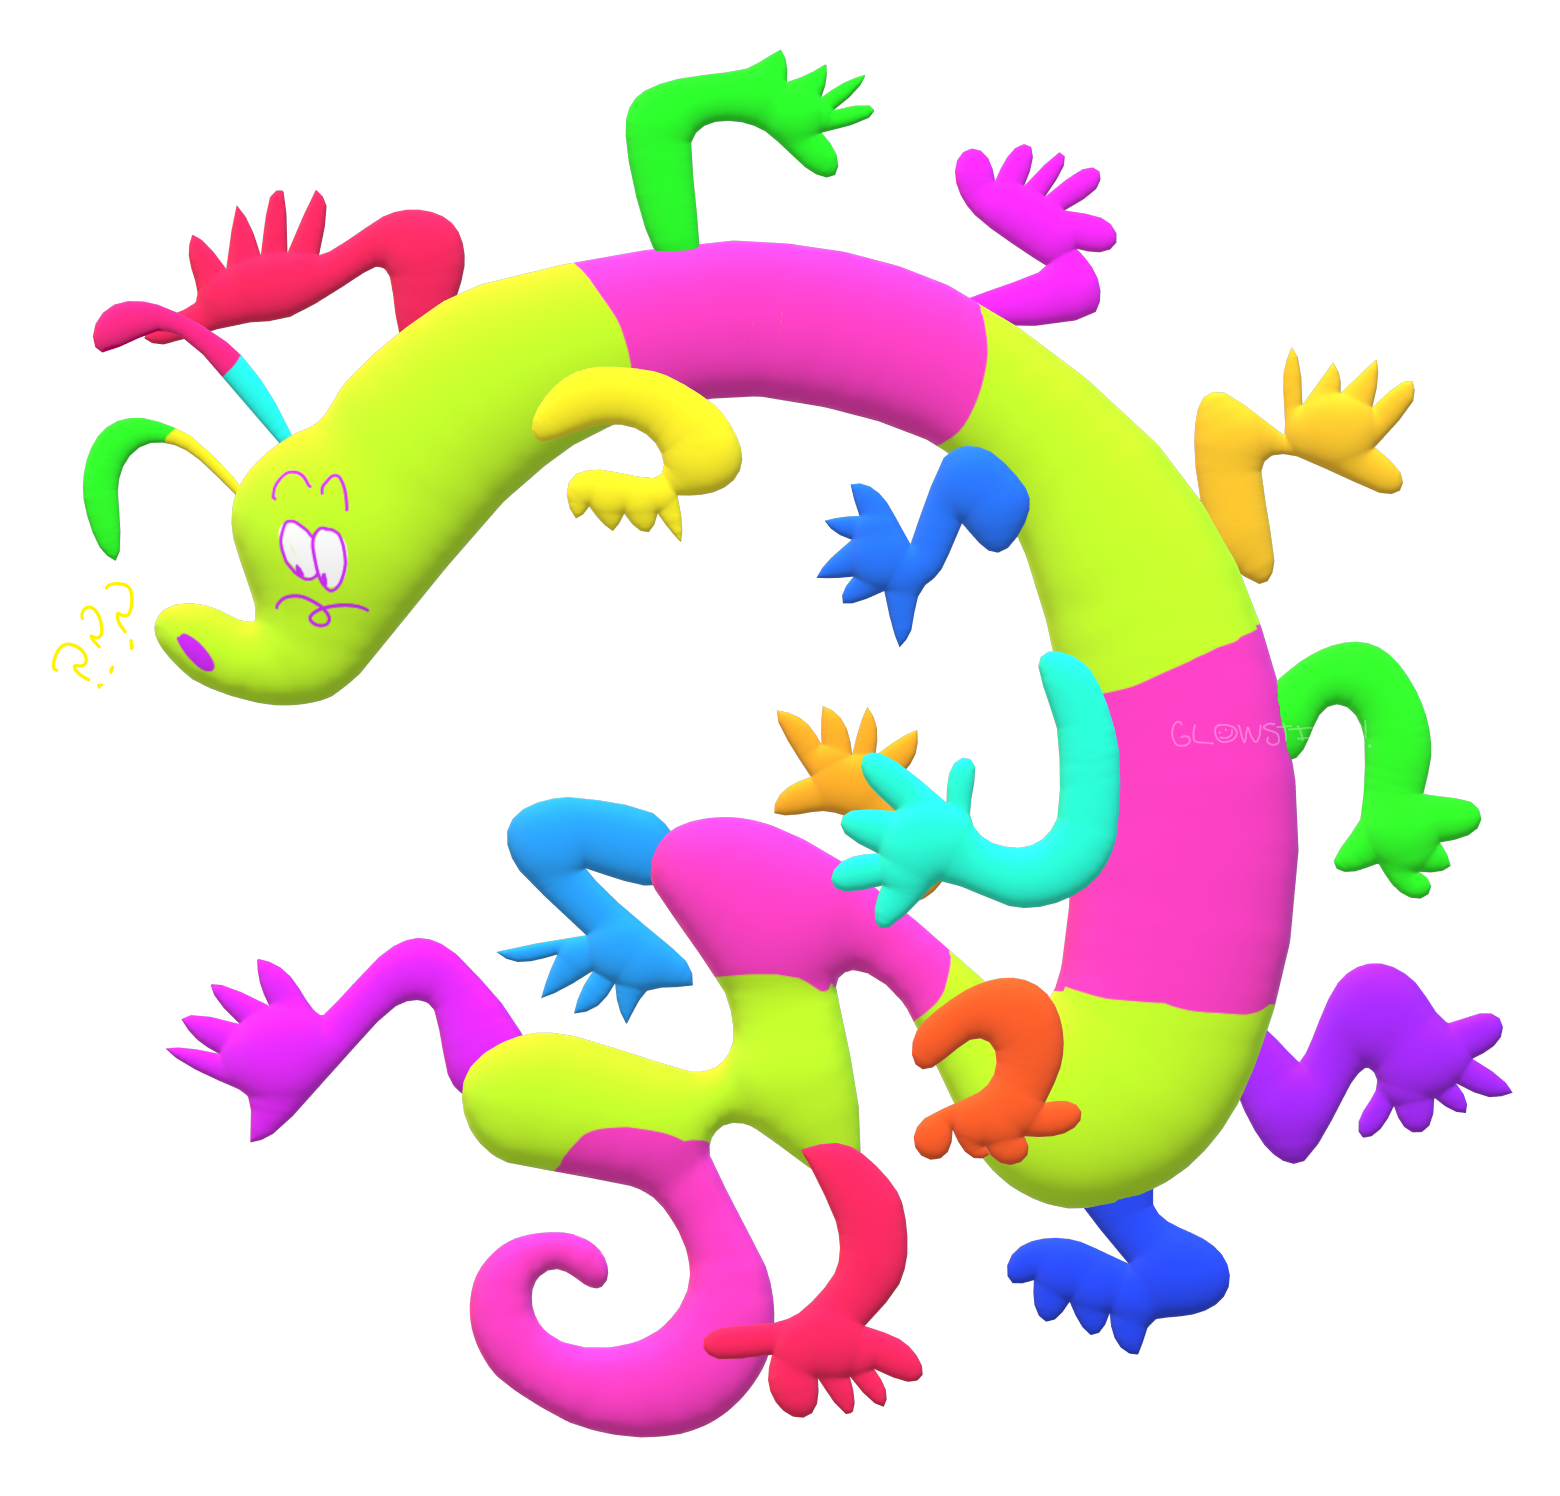 A Paint 3D transparent render of a gummy worm character with a green and pink striped body and multicolored arms sticking out across their body. They are positioned so that it looks like they are latched onto a wall and their body curls into the shape of a question mark. They are looking curiously to the bottom left.